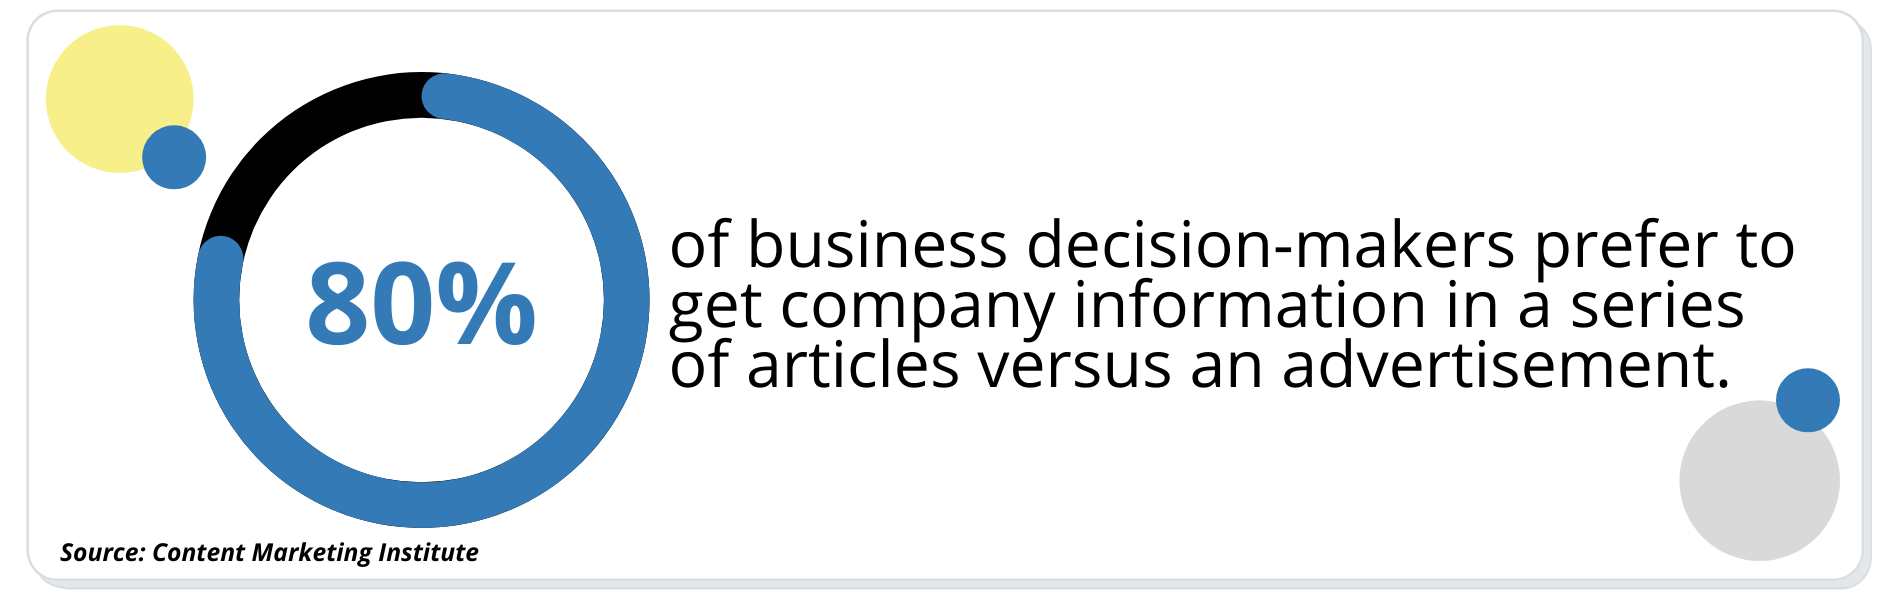 of business decision-makers prefer to get company information in a series of articles versus an advertisement.